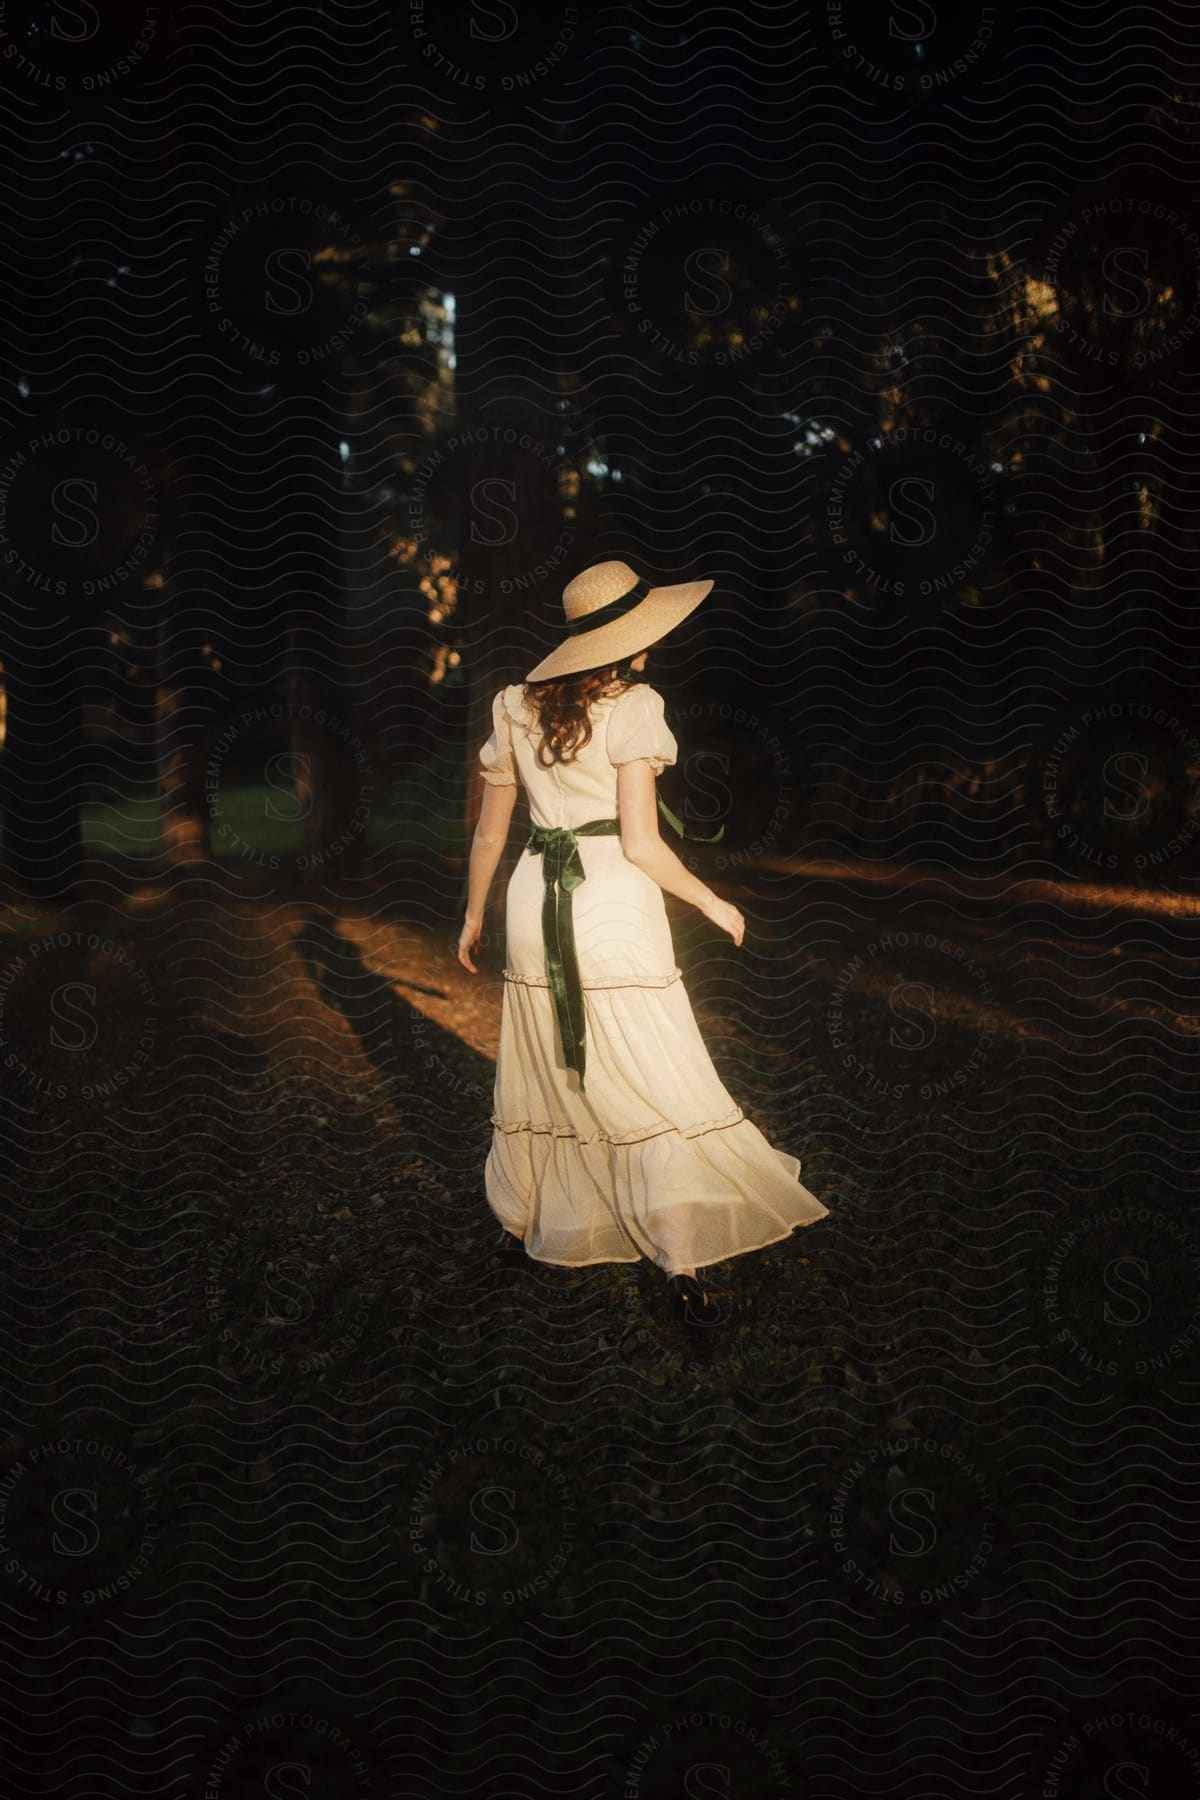 Model woman wearing a sun hat and a long white dress in a field with trees around her